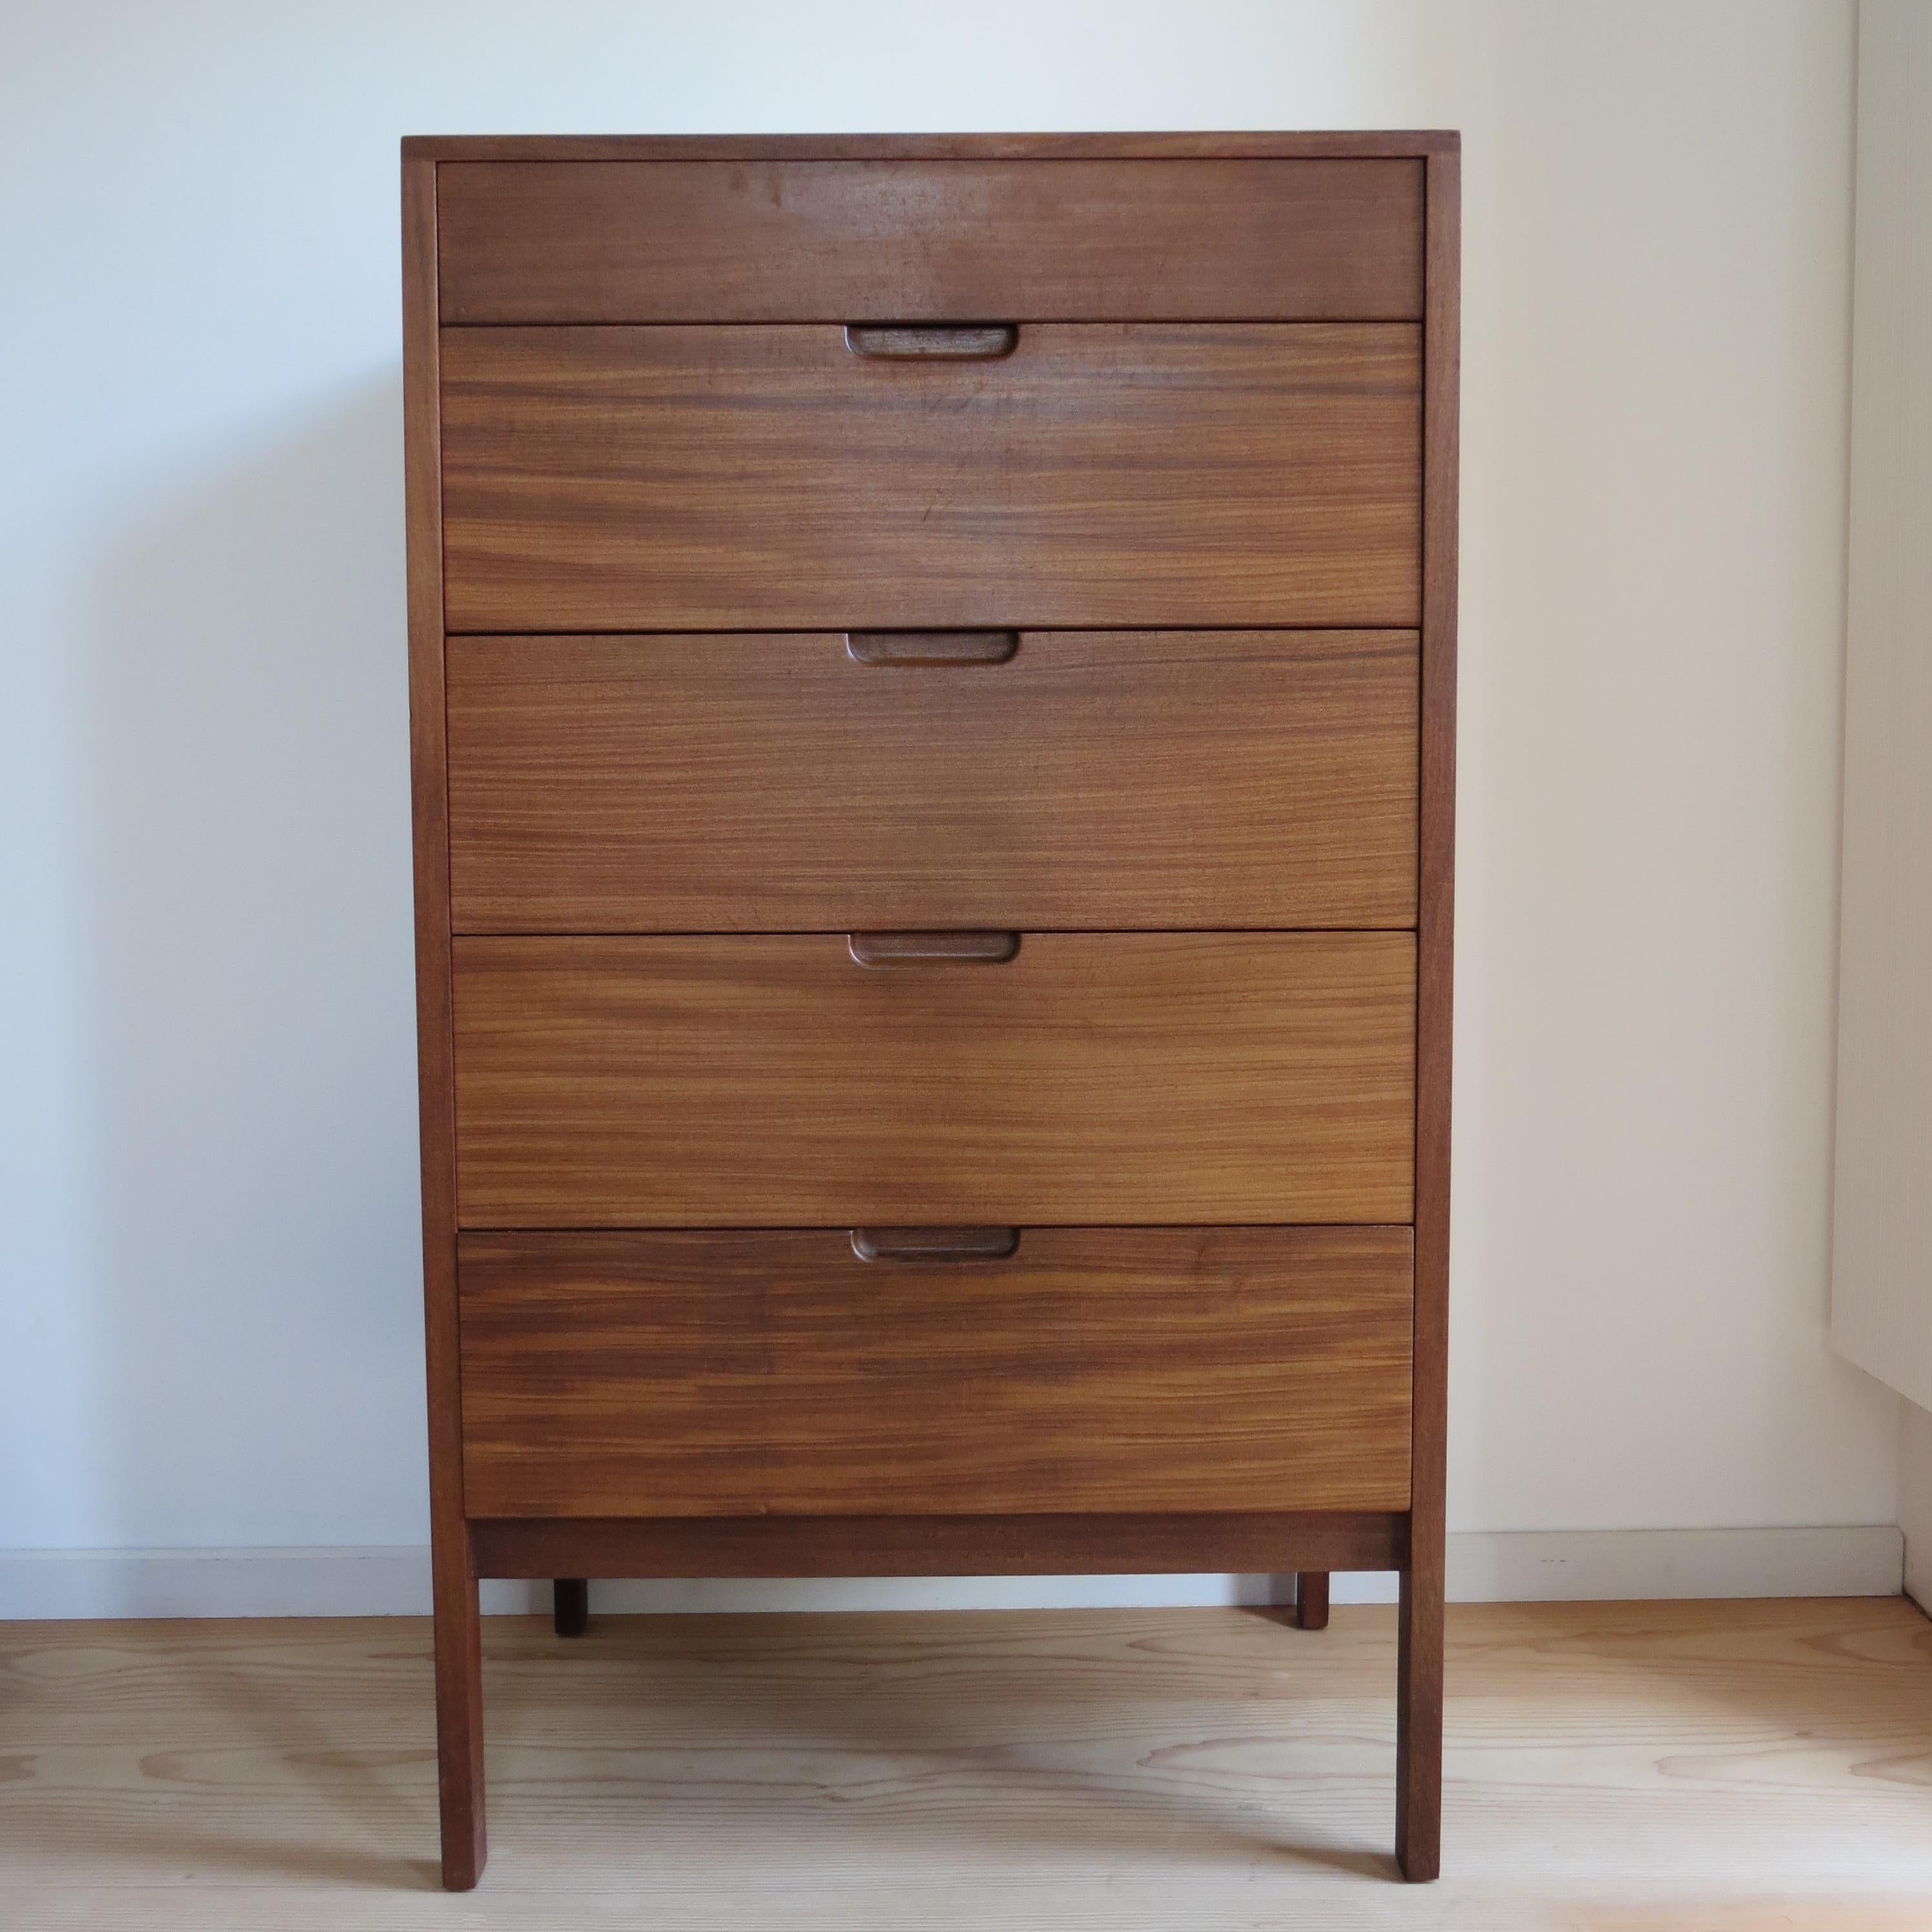 A very good quality mid-century chest of drawers, designed by Richard Hornby and produced by Fyne Ladye of Banbury UK in the 1960s.
Made from Afrormosia with solid Afrormosia drawer fronts and Brazilian Mahogany drawer linings and recessed handles.